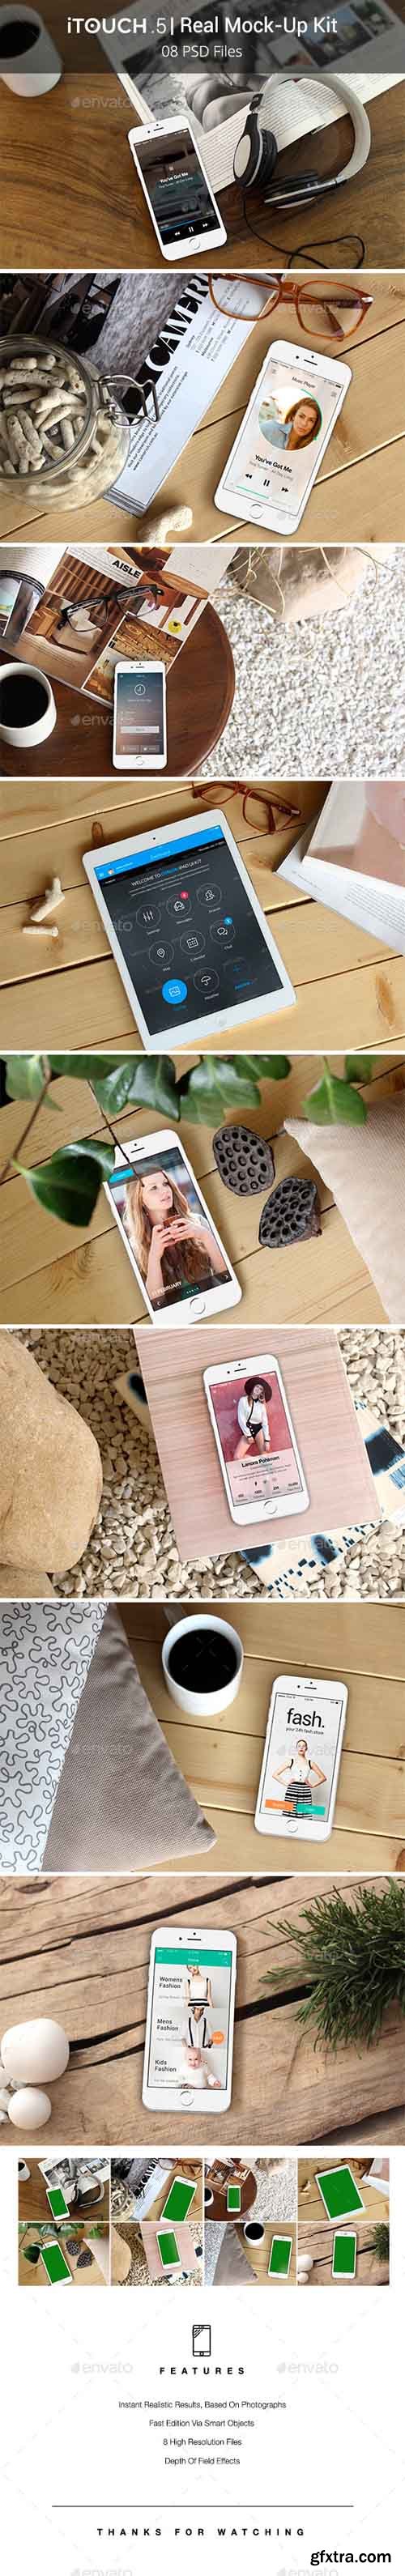 GR - iTouch 5 | 08 Photorealistic MockUp 11967695